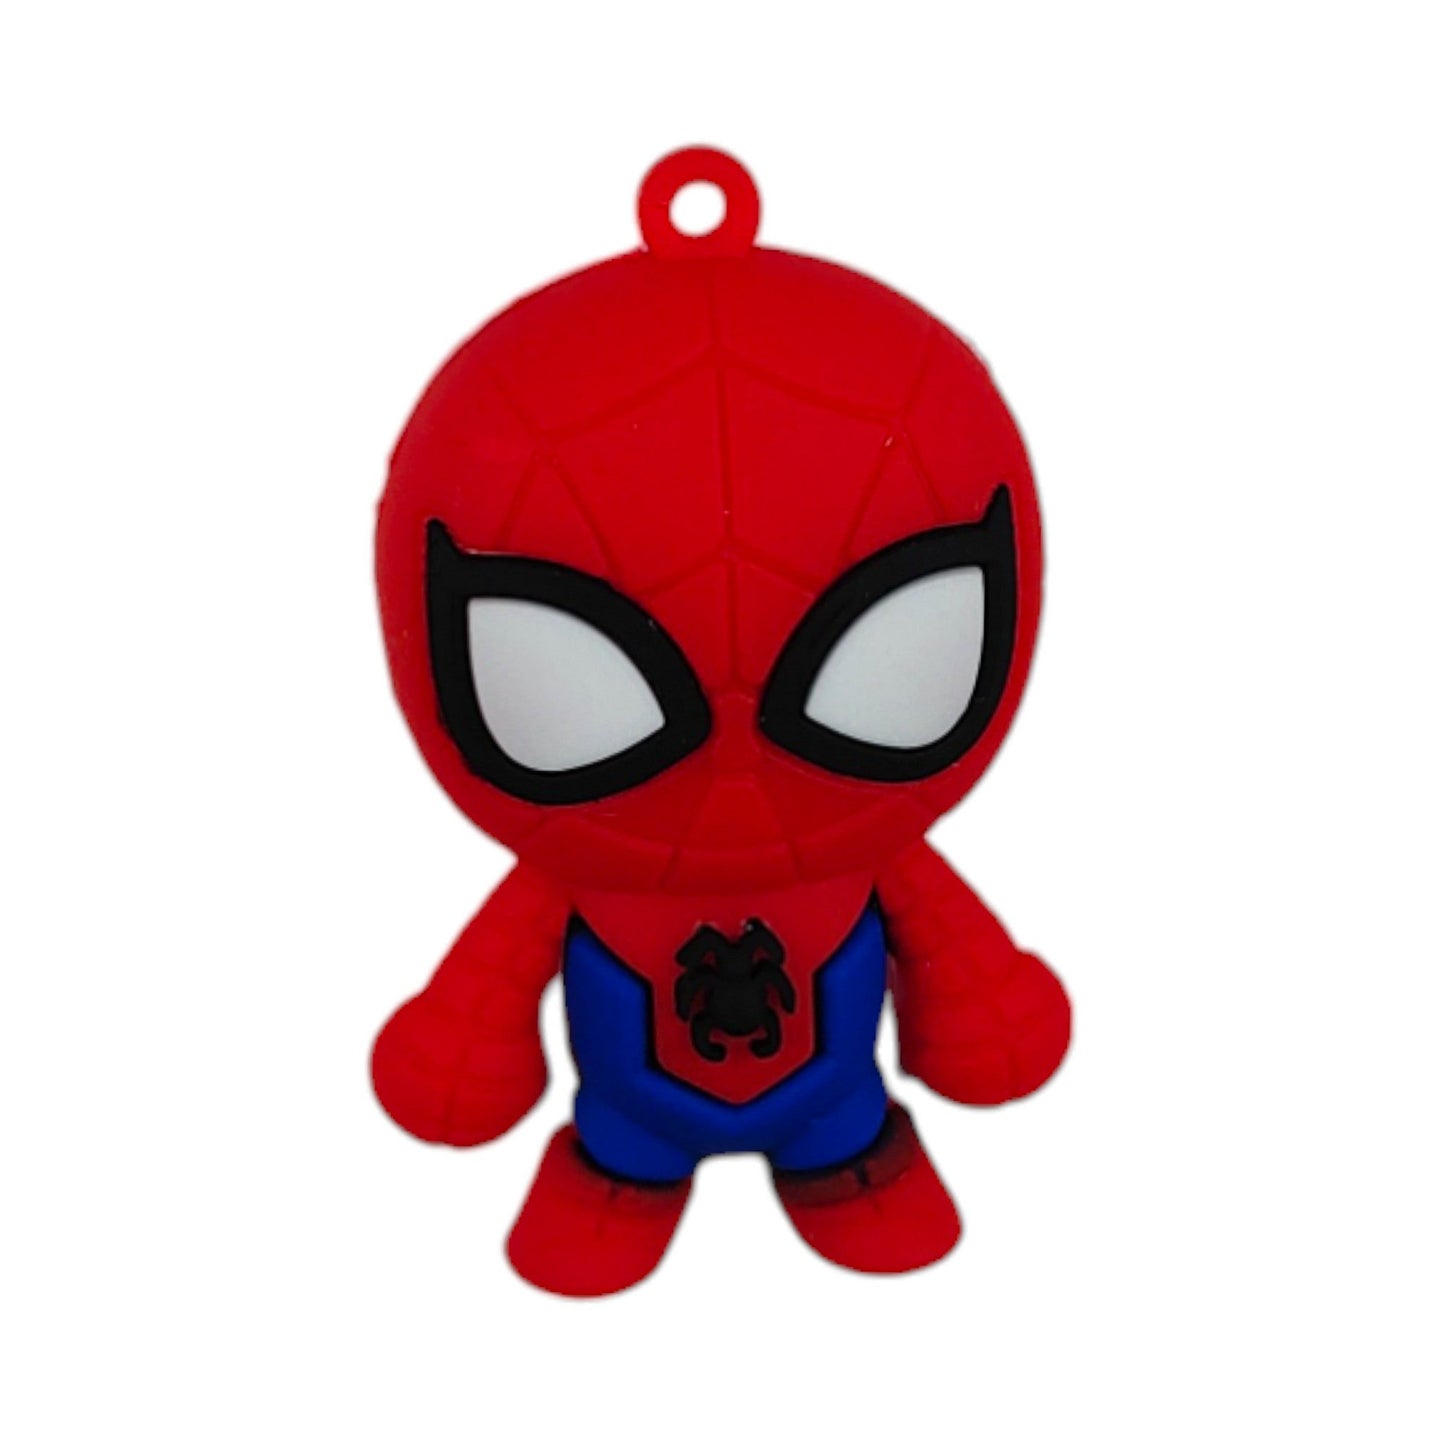 Indian Petals SpiderMan Doll Resin Motif For Craft Design Or Decoration, 25 Pcs,Red-13526